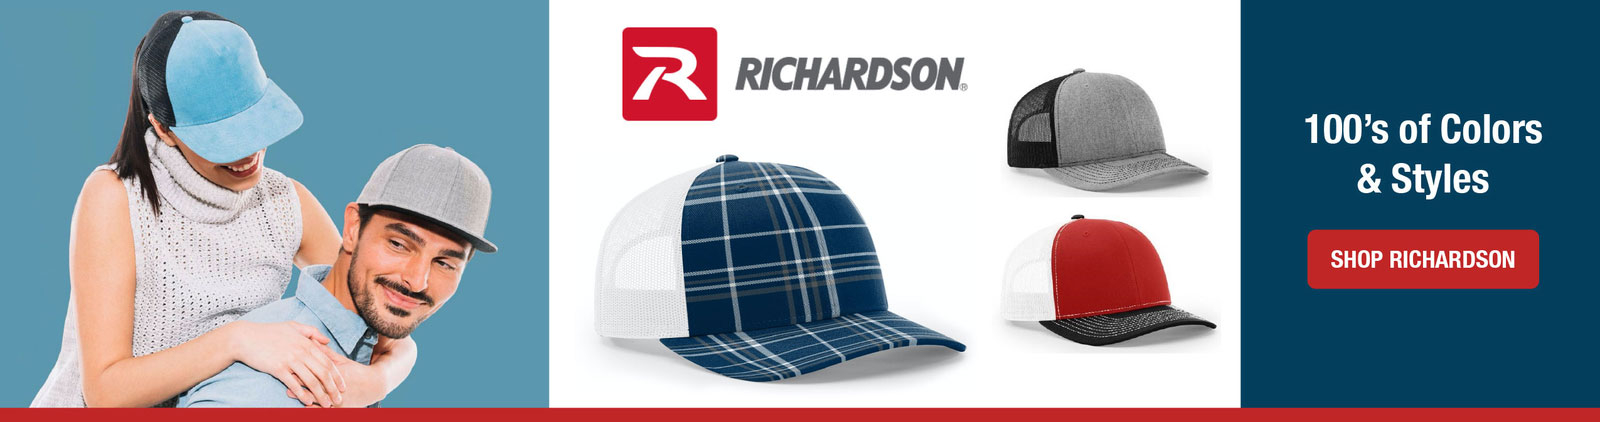 Richardson cap styles for men and woman